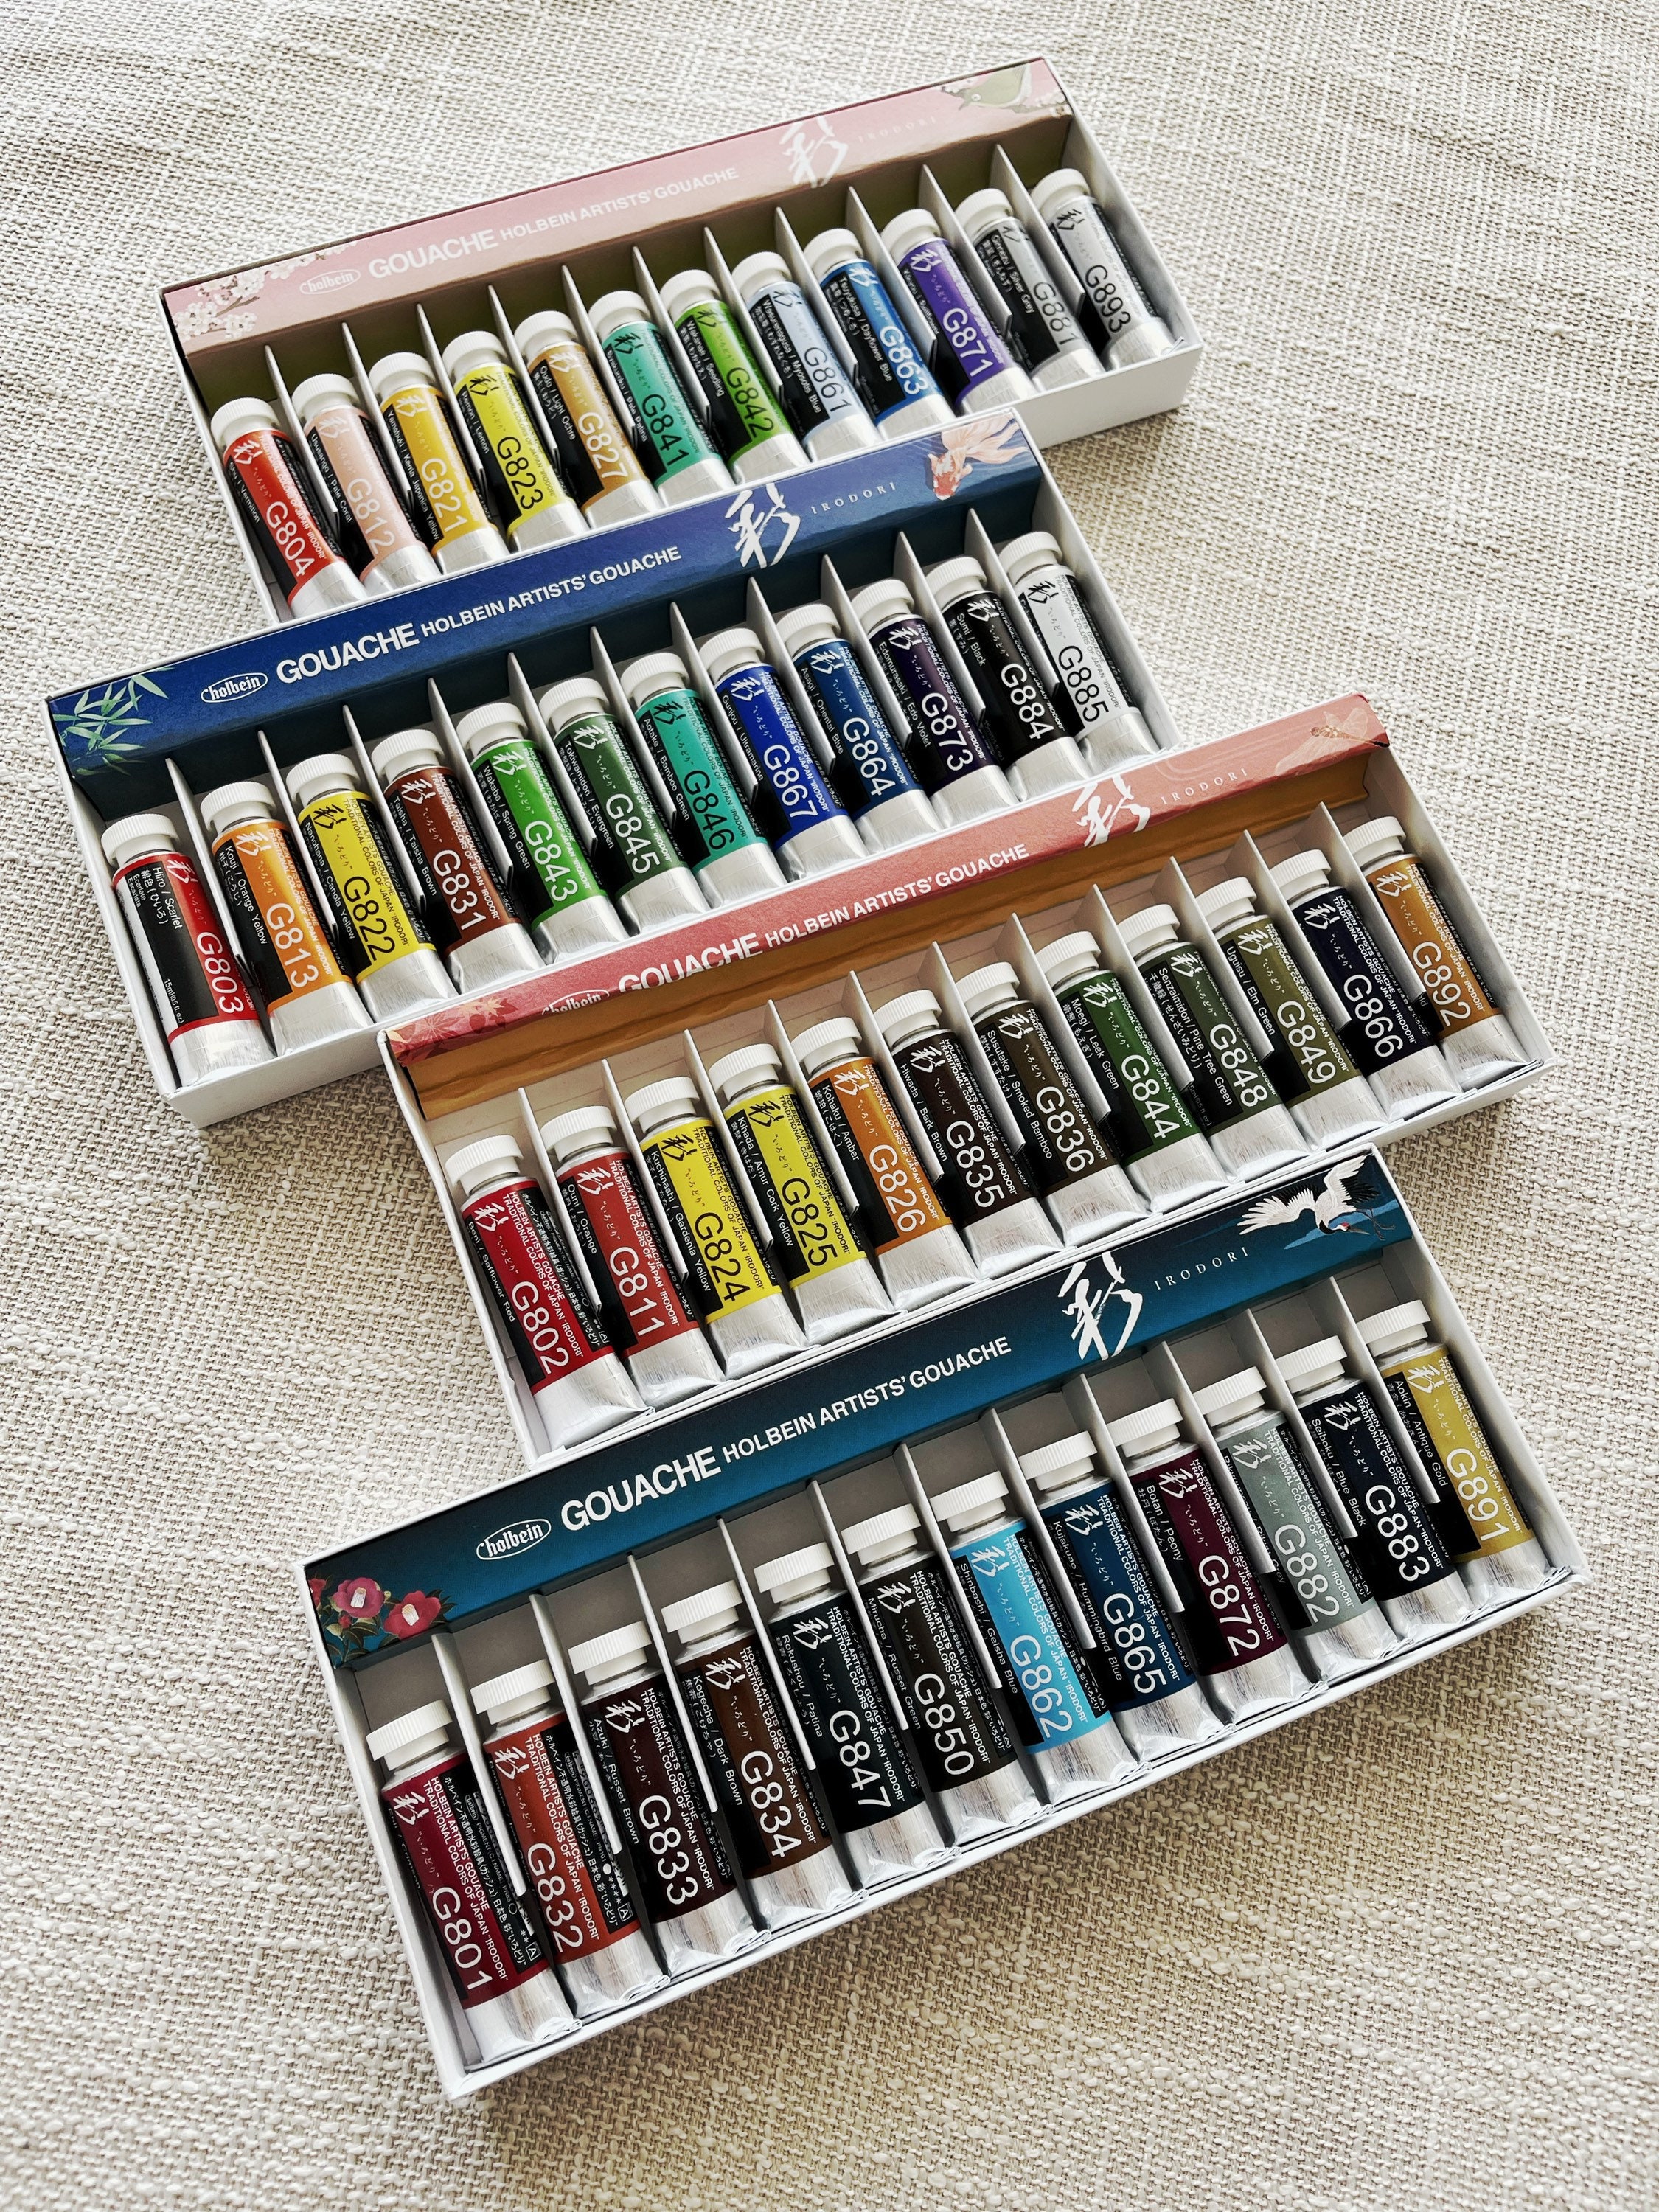 2021 New Product ! Holbein Gouache Traditional Colors of Japan  Summer  -  15ml X 12 Colors Set G752 – Art&Stationery